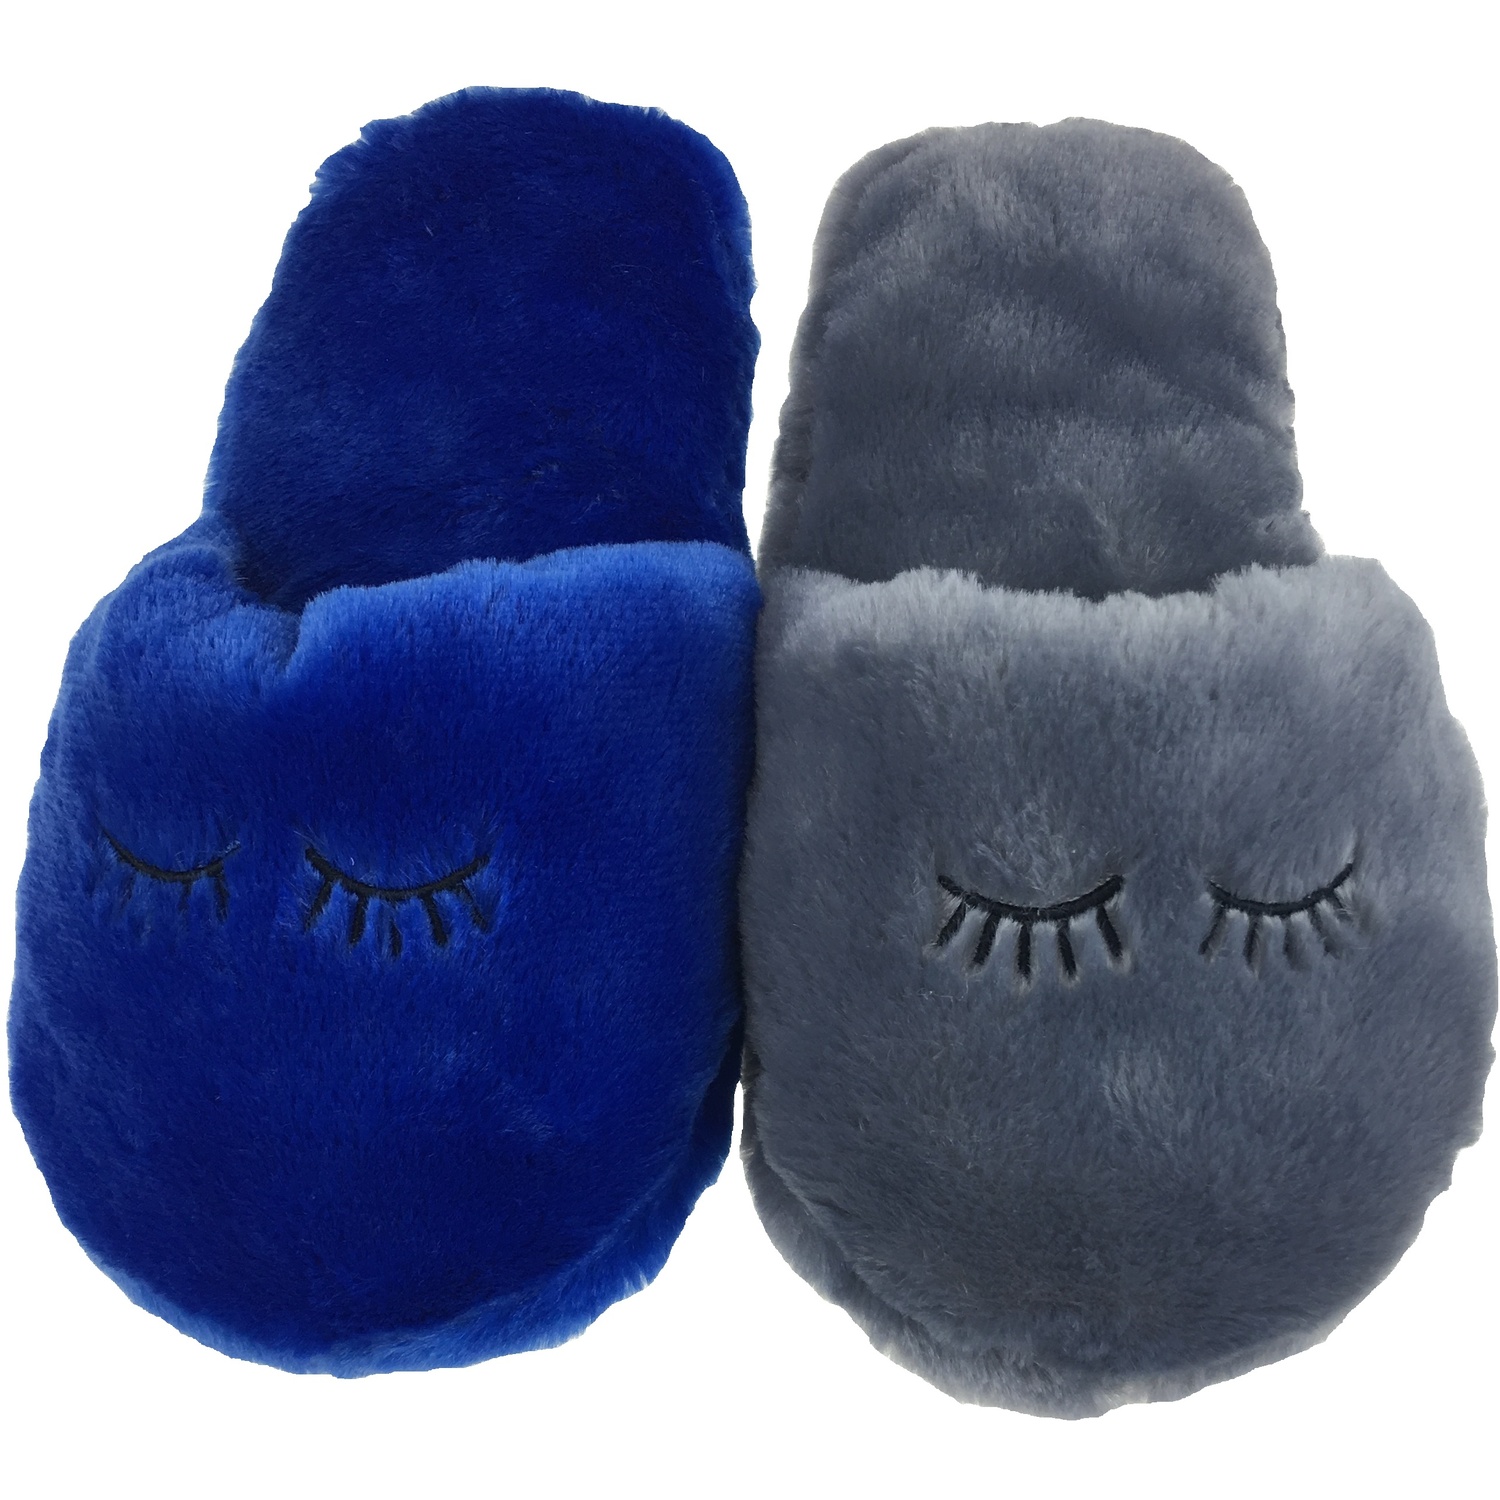 Single Clever Paws Plush Slipper Dog Toy in Assorted styles Image